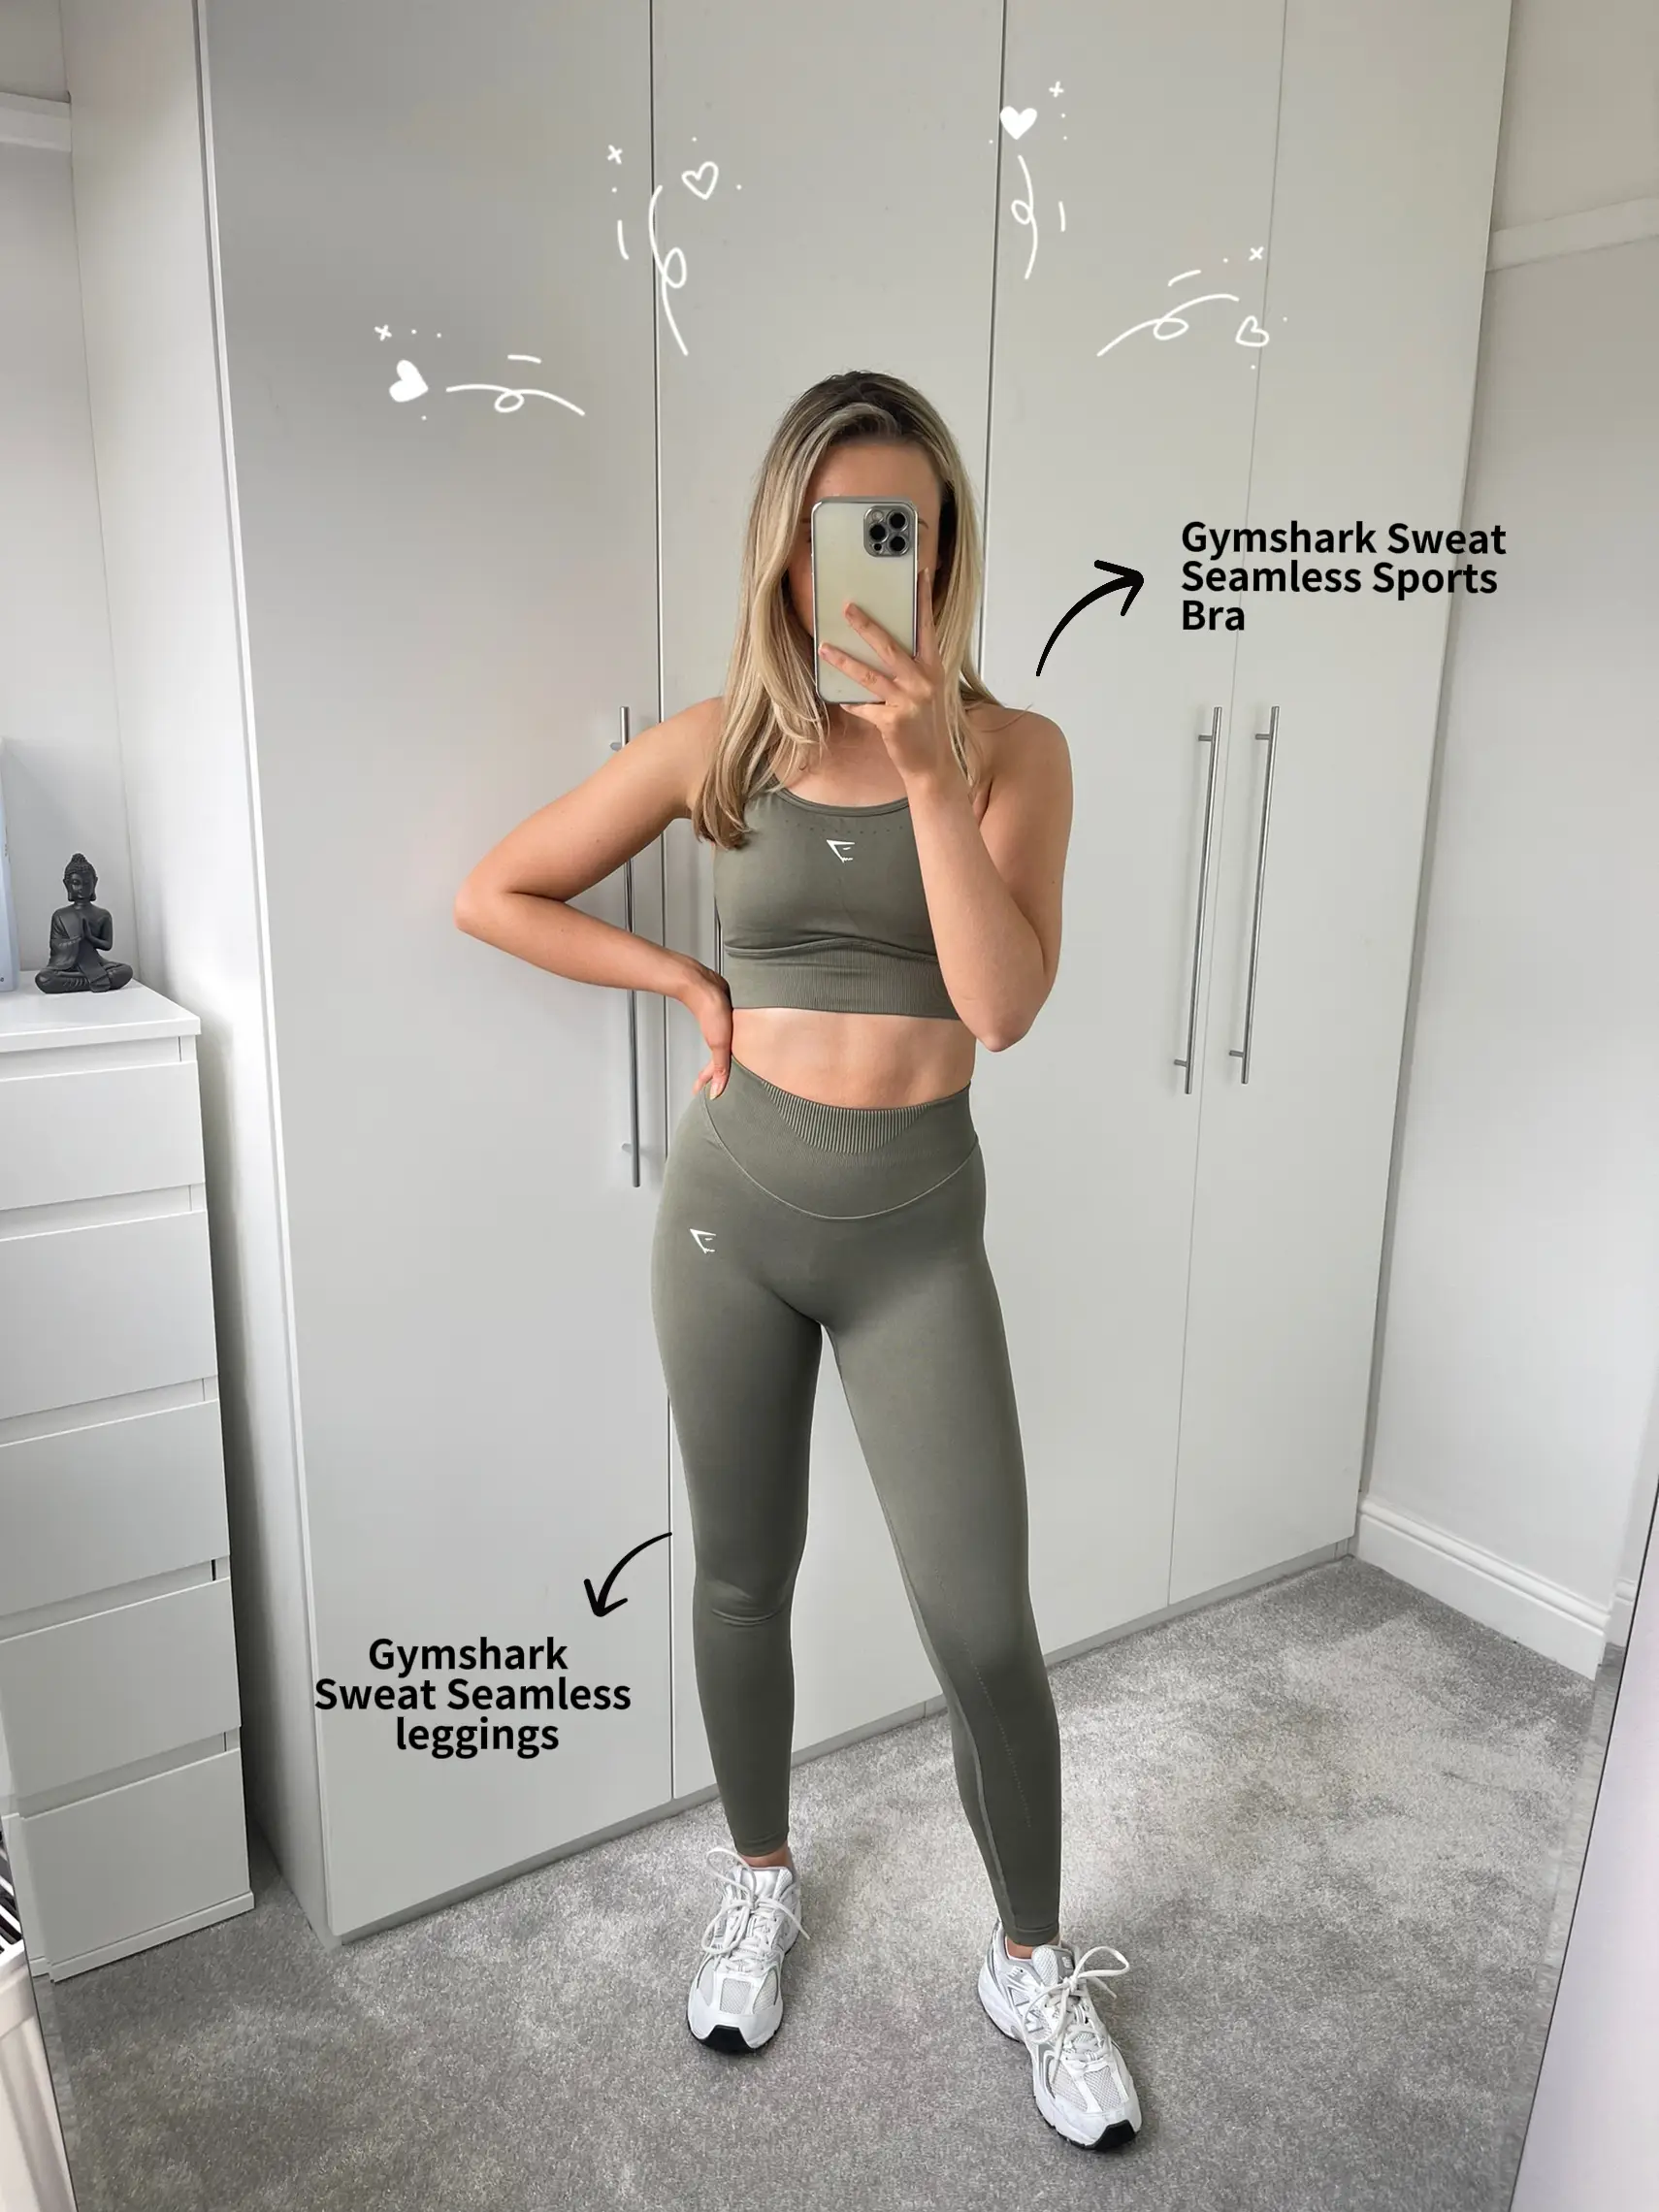 Styling a Gymshark activewear set 🖤